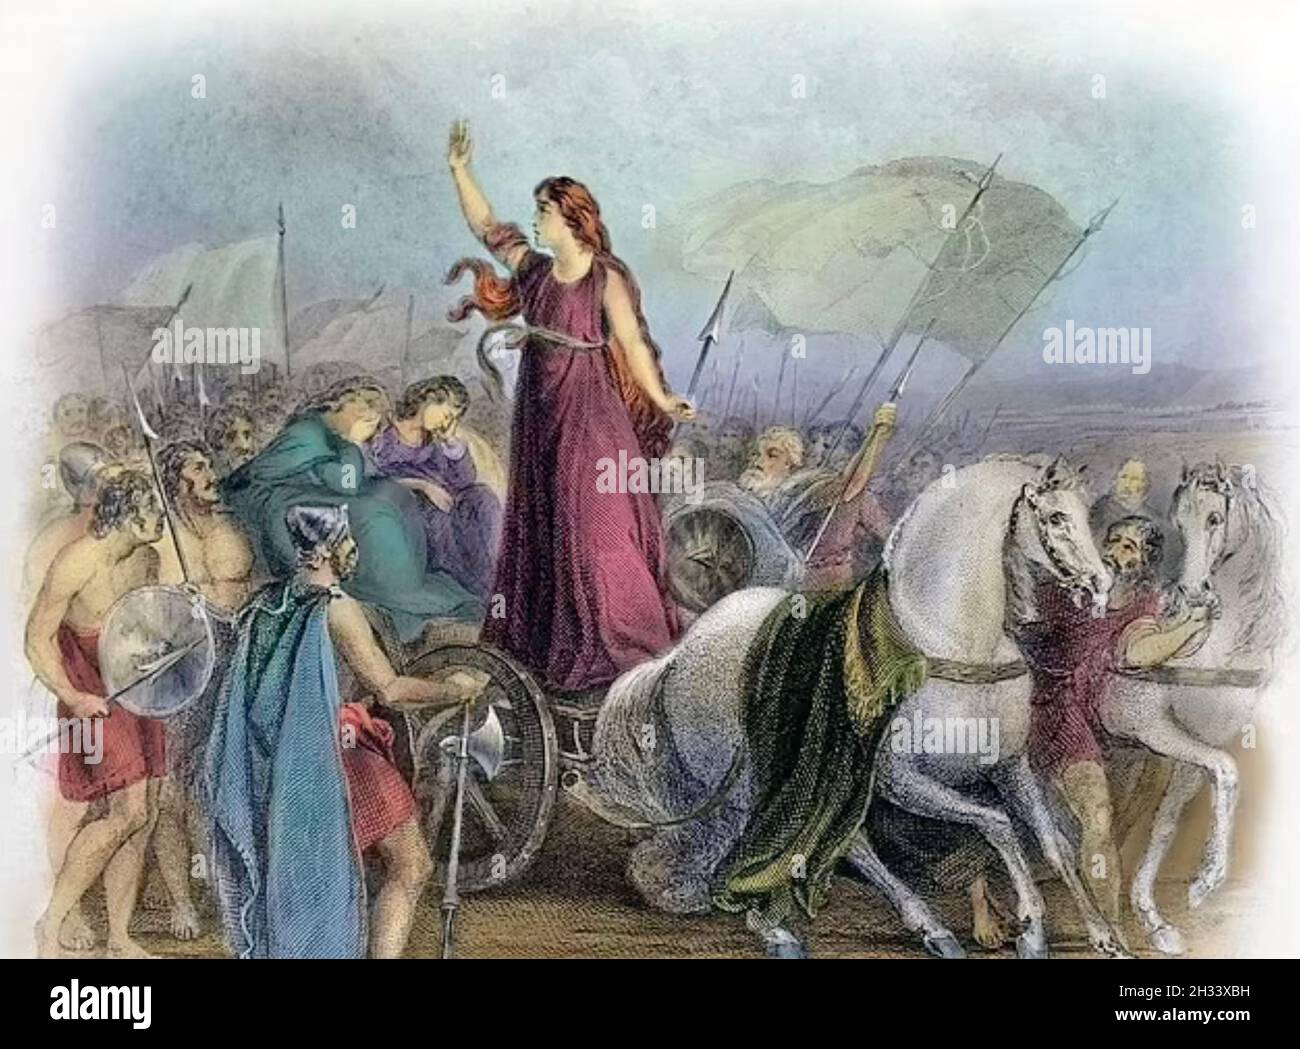 BOUDICA  19th century illustration of the queen of the British Iceni tribe who lead an uprising against Roman occupation about AD 60. Stock Photo